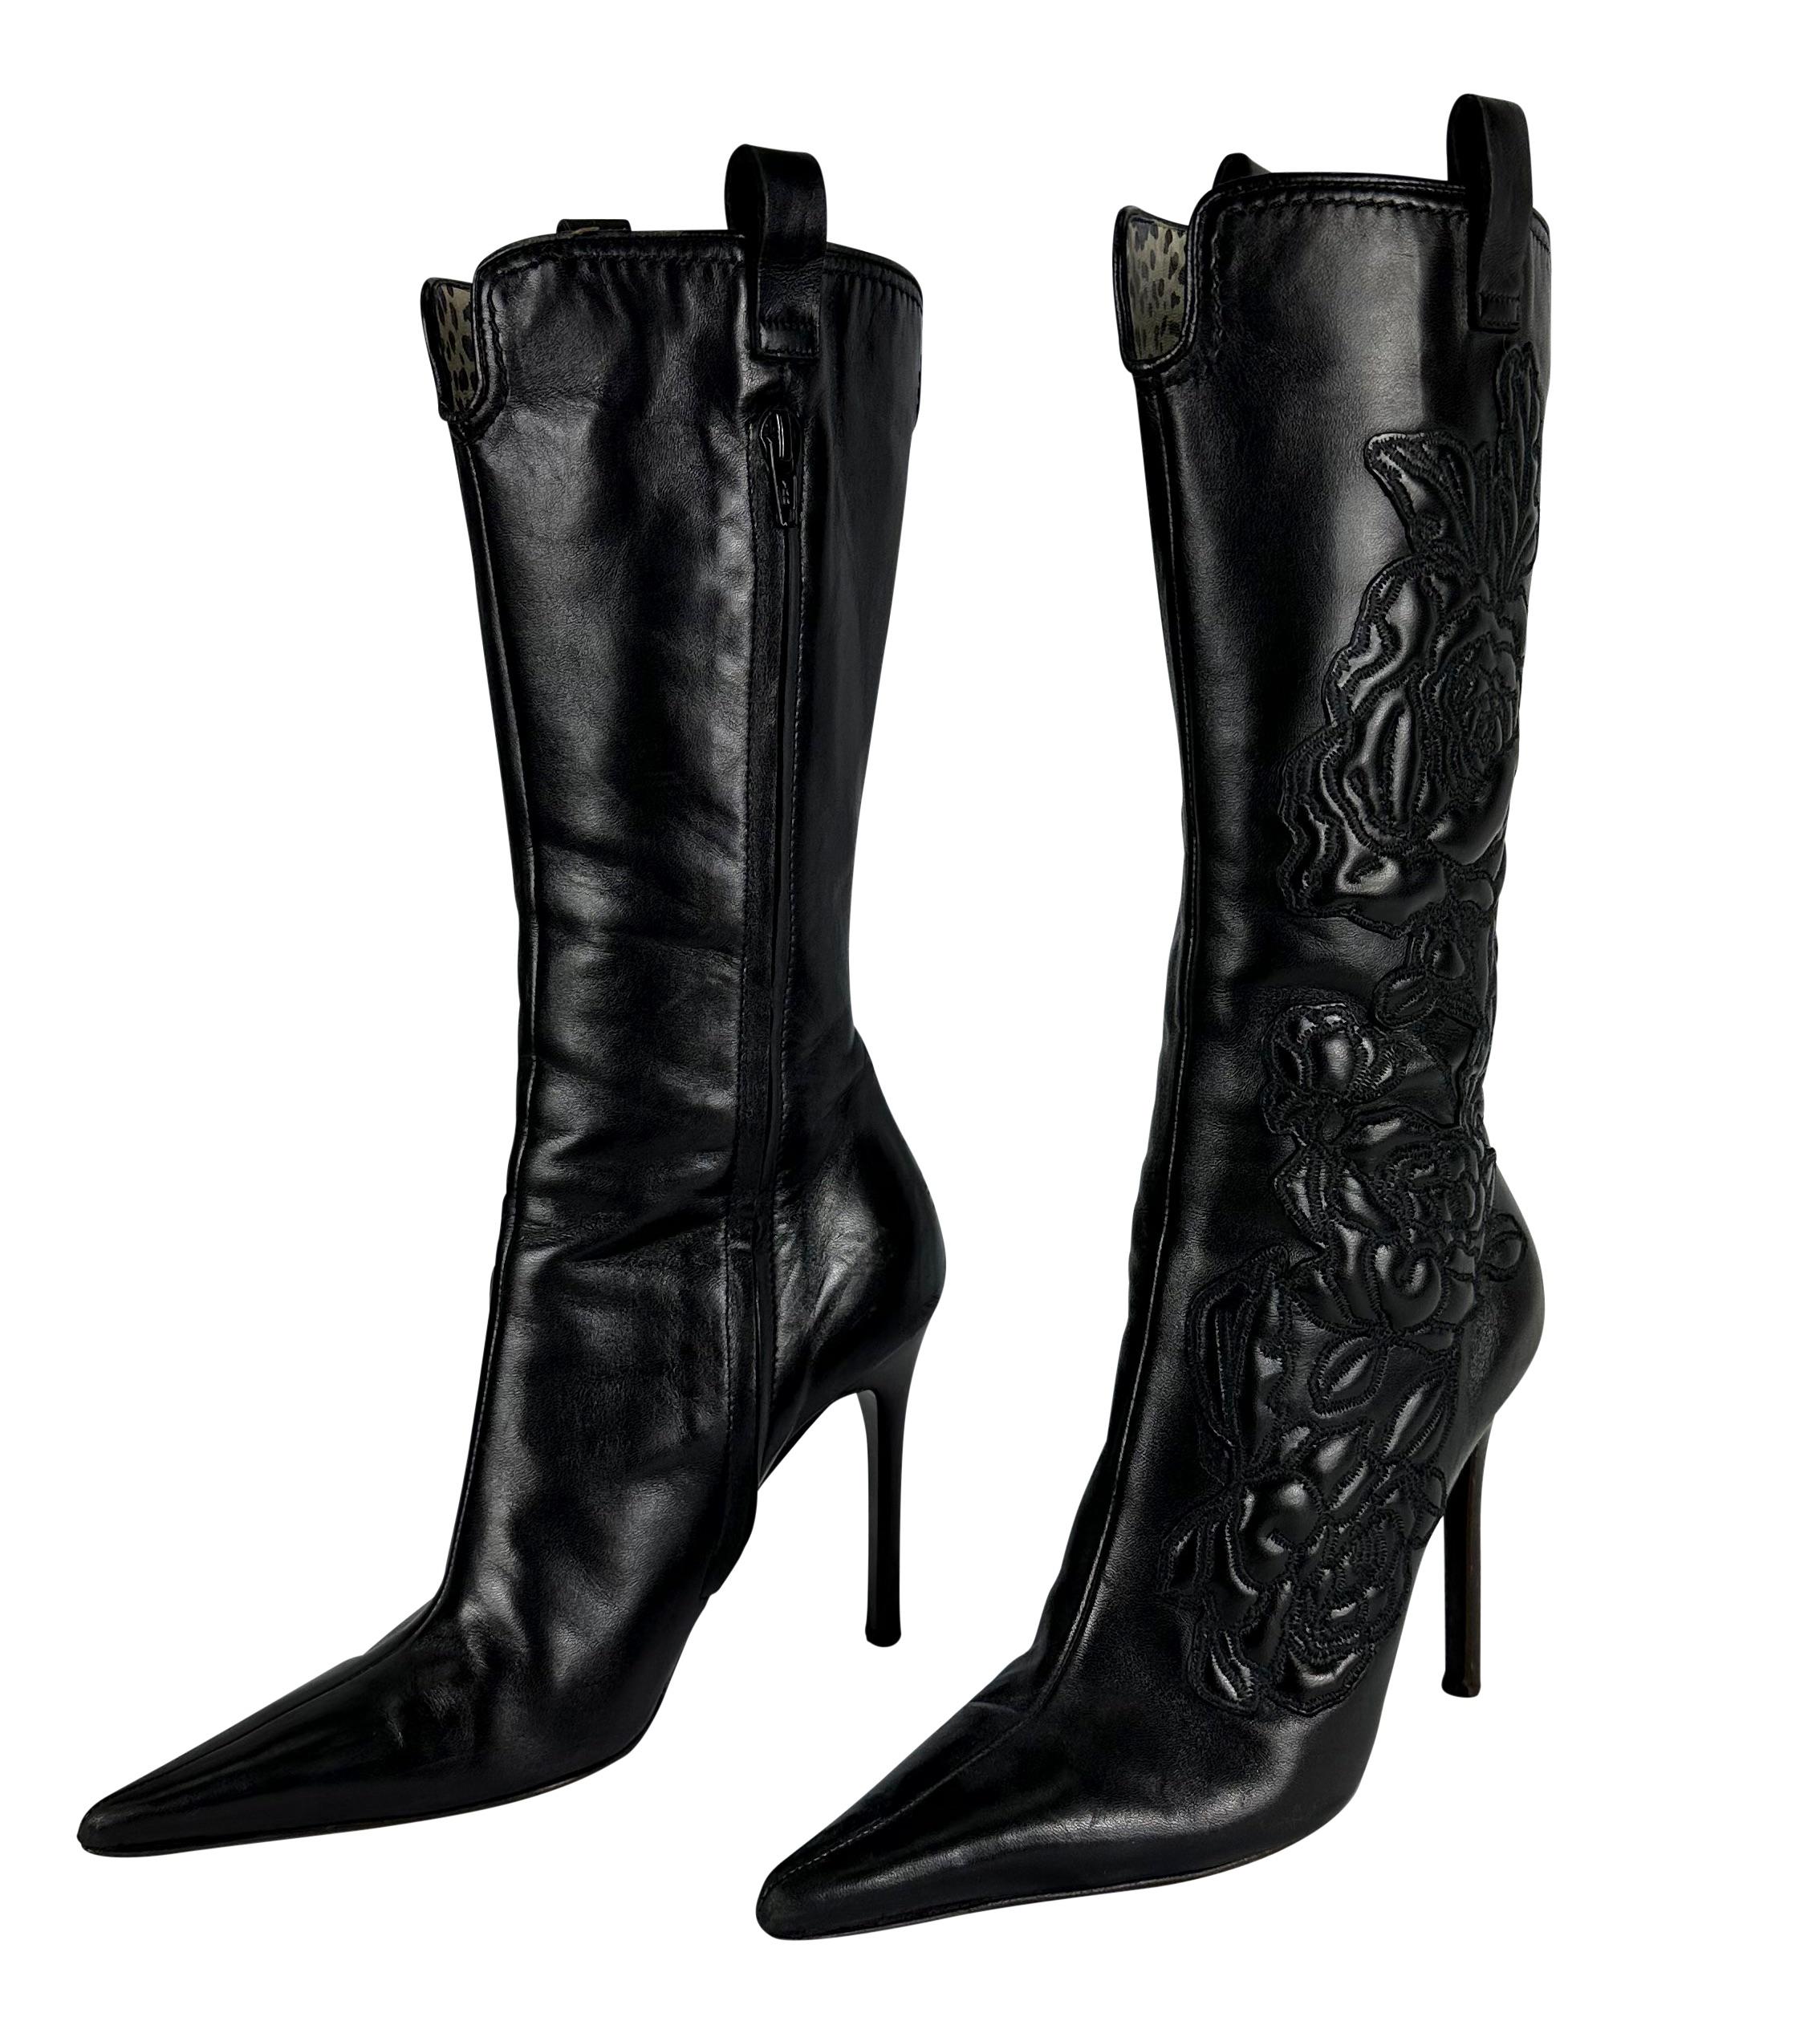 Presenting a fabulous pair of black quilted Roberto Cavalli heeled boots. From 2003, these chic boots feature a quilted rose design, pointed toe, and boot jacks. Add these effortlessly chic boots to your wardrobe! 

Size - 37 IT